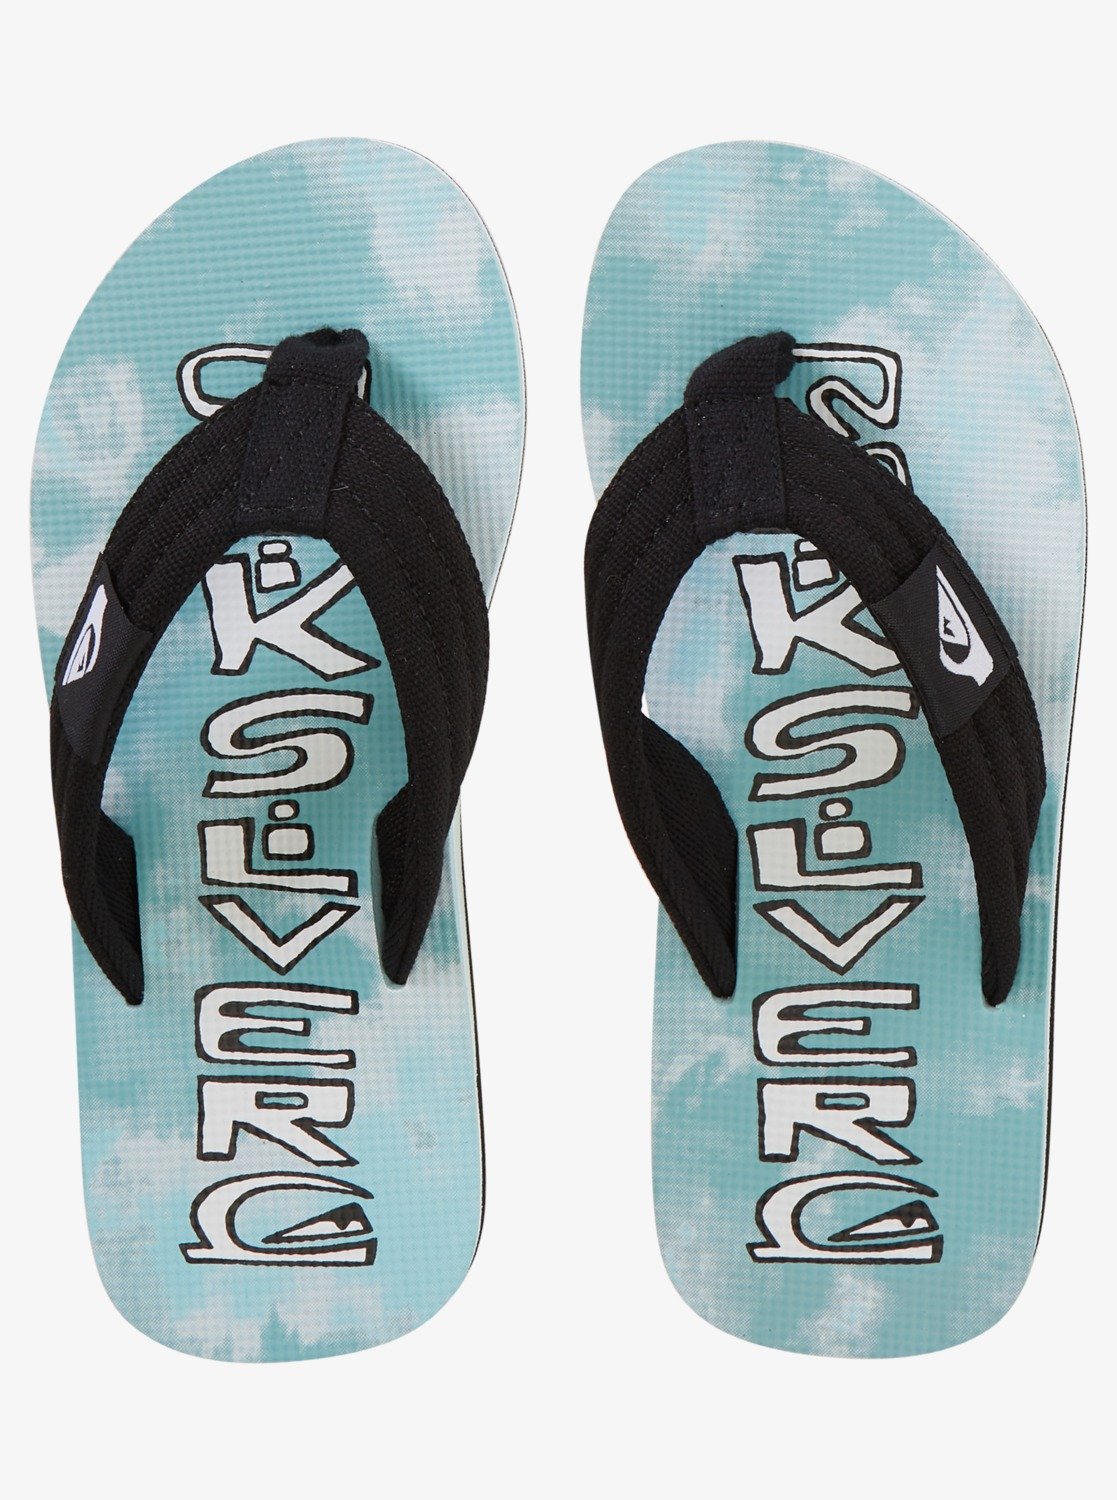 Quiksilver Molokai Layback Youth Sandal BYJ1-Blue 1 11 C